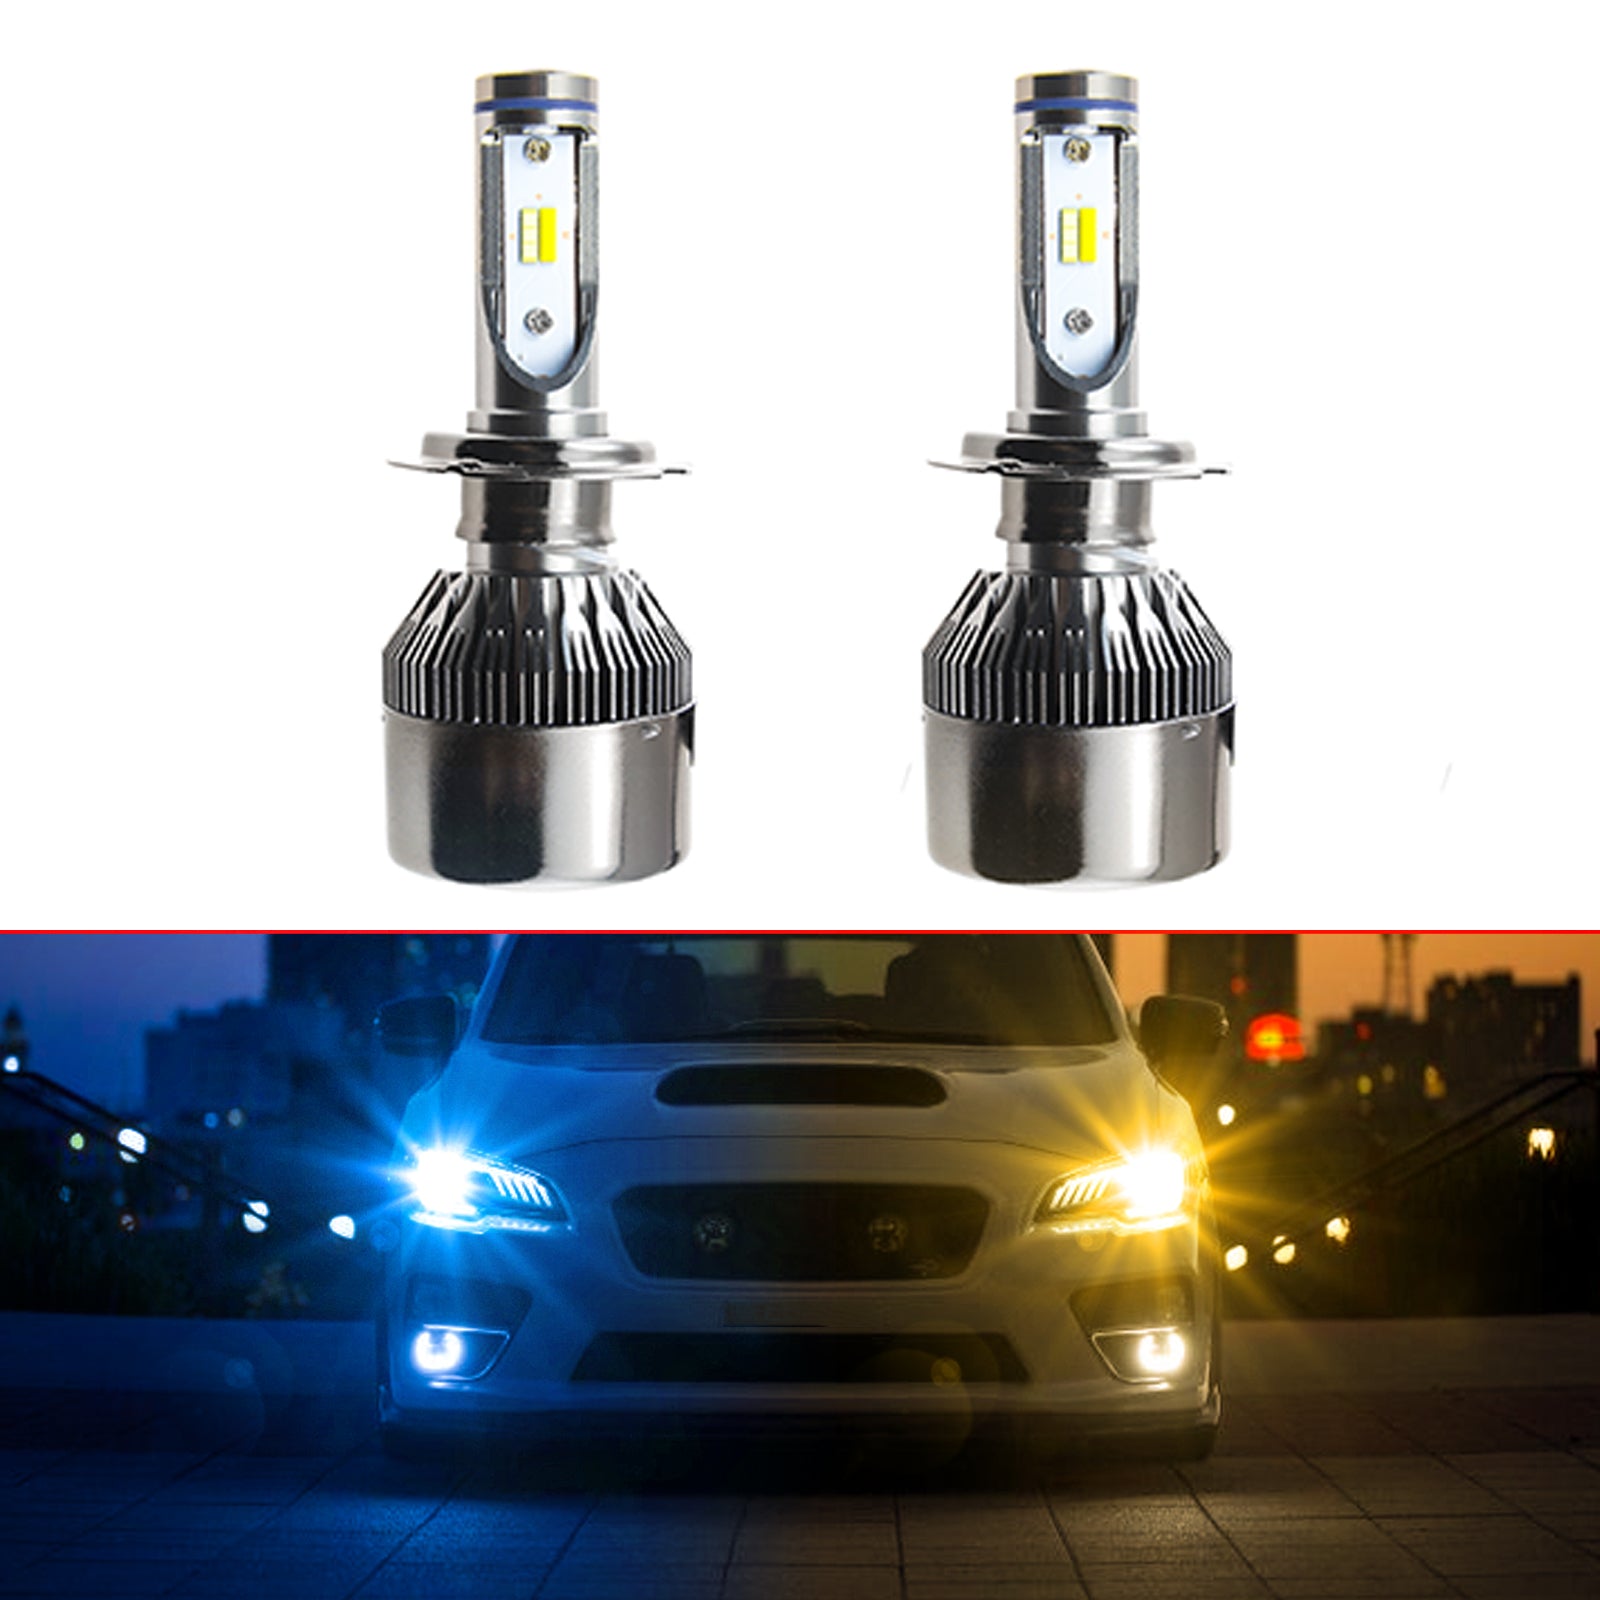 H4 Hi/Low Dual Beam LED Headlight Kit - 6000K 8000LM with Philips ZES Chips